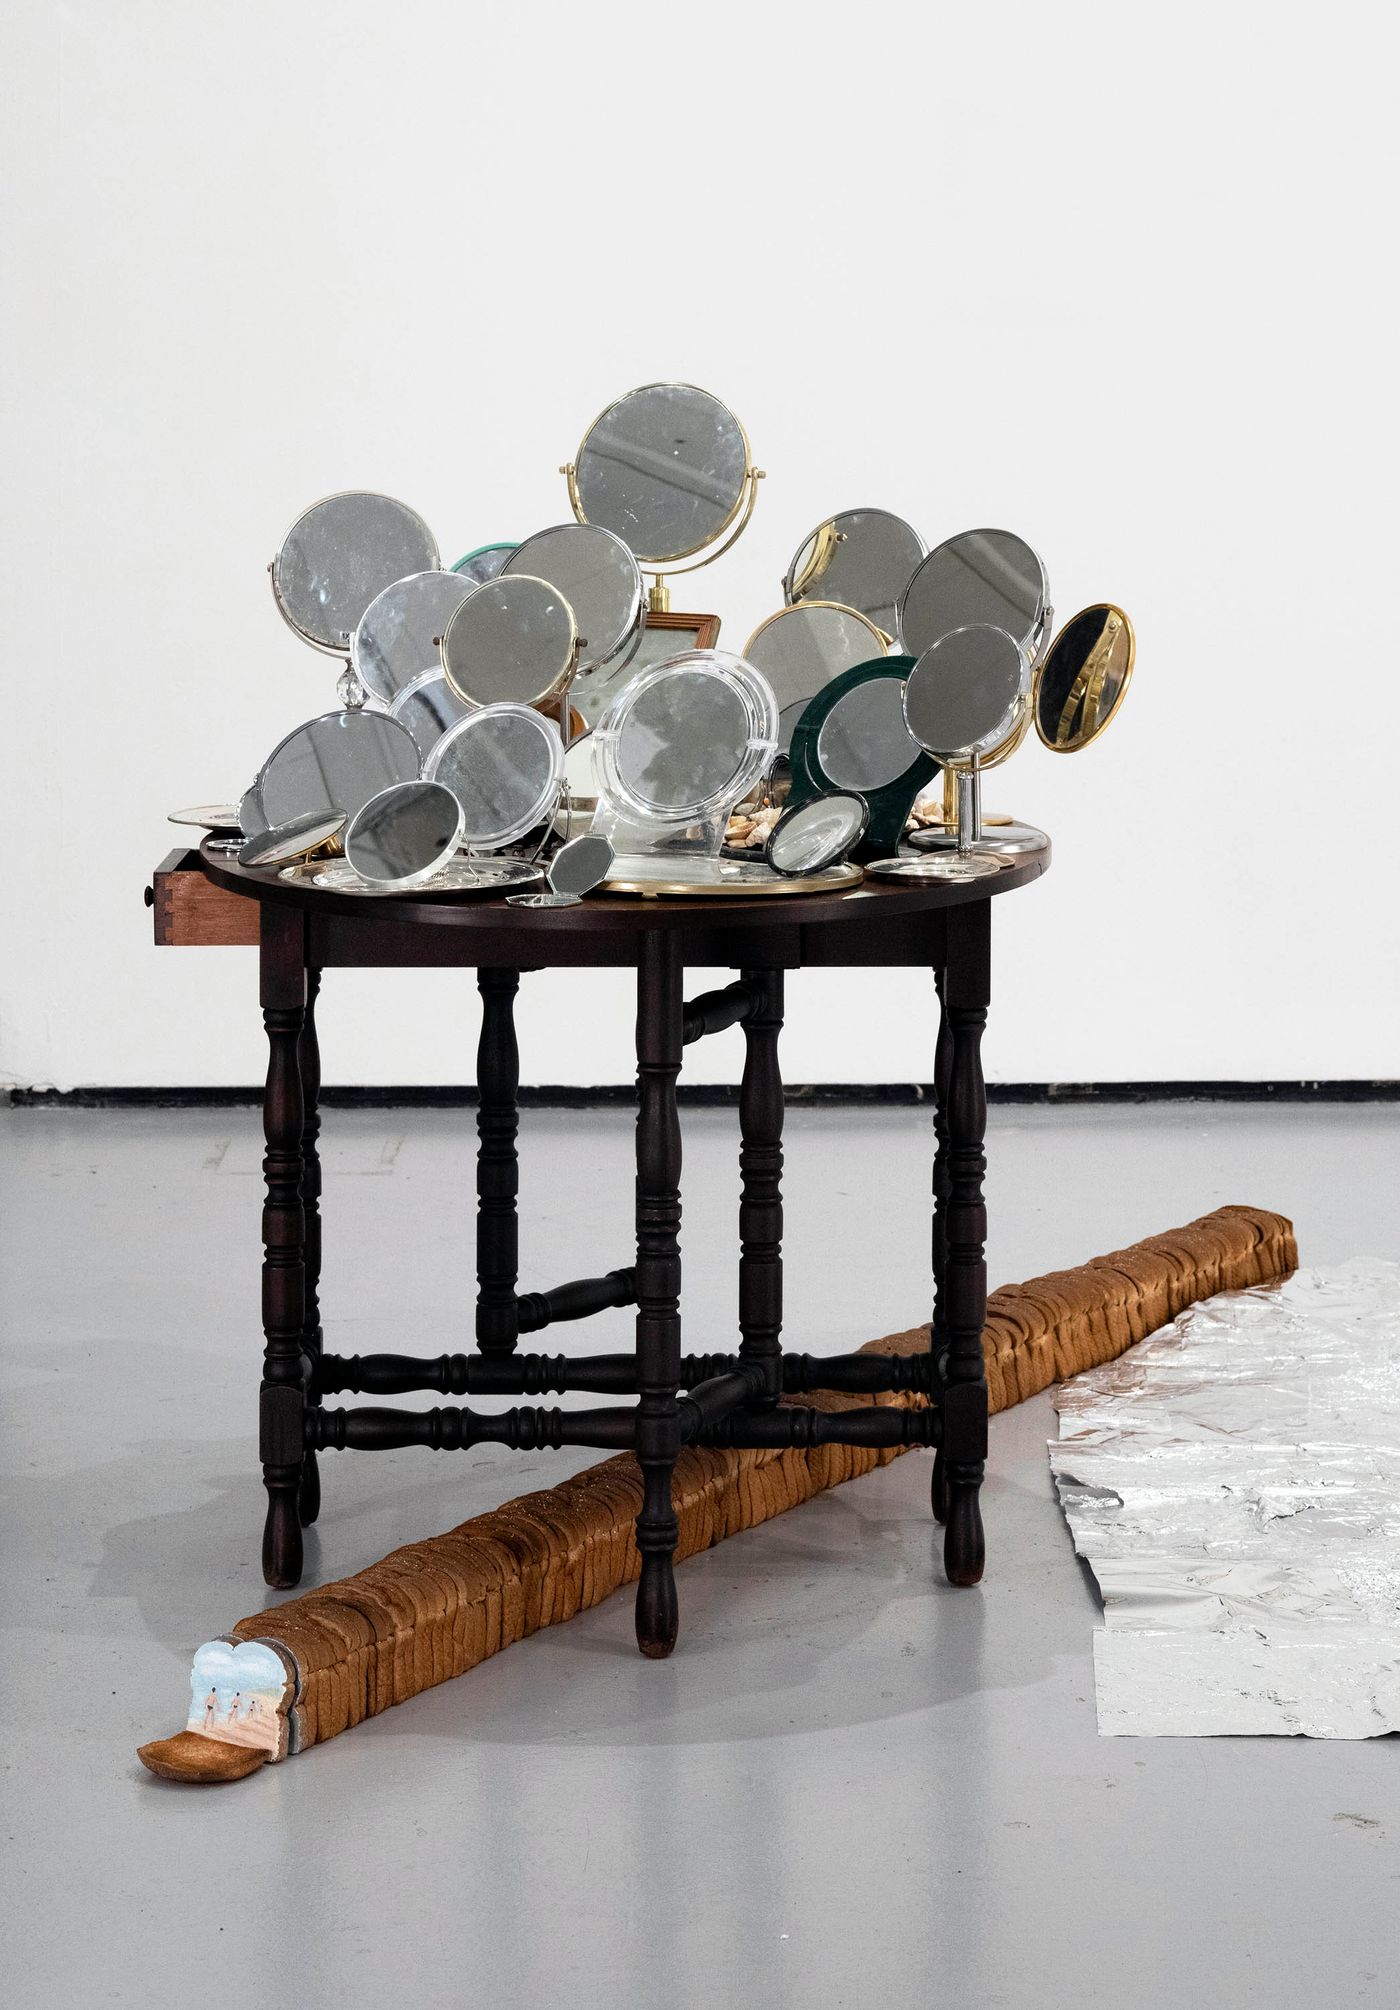 Incarnations, 2022. Mirrors, silver plates, table, bread; 45 inches x 47 inches x 140 inches. Photo: Miraj Patel.